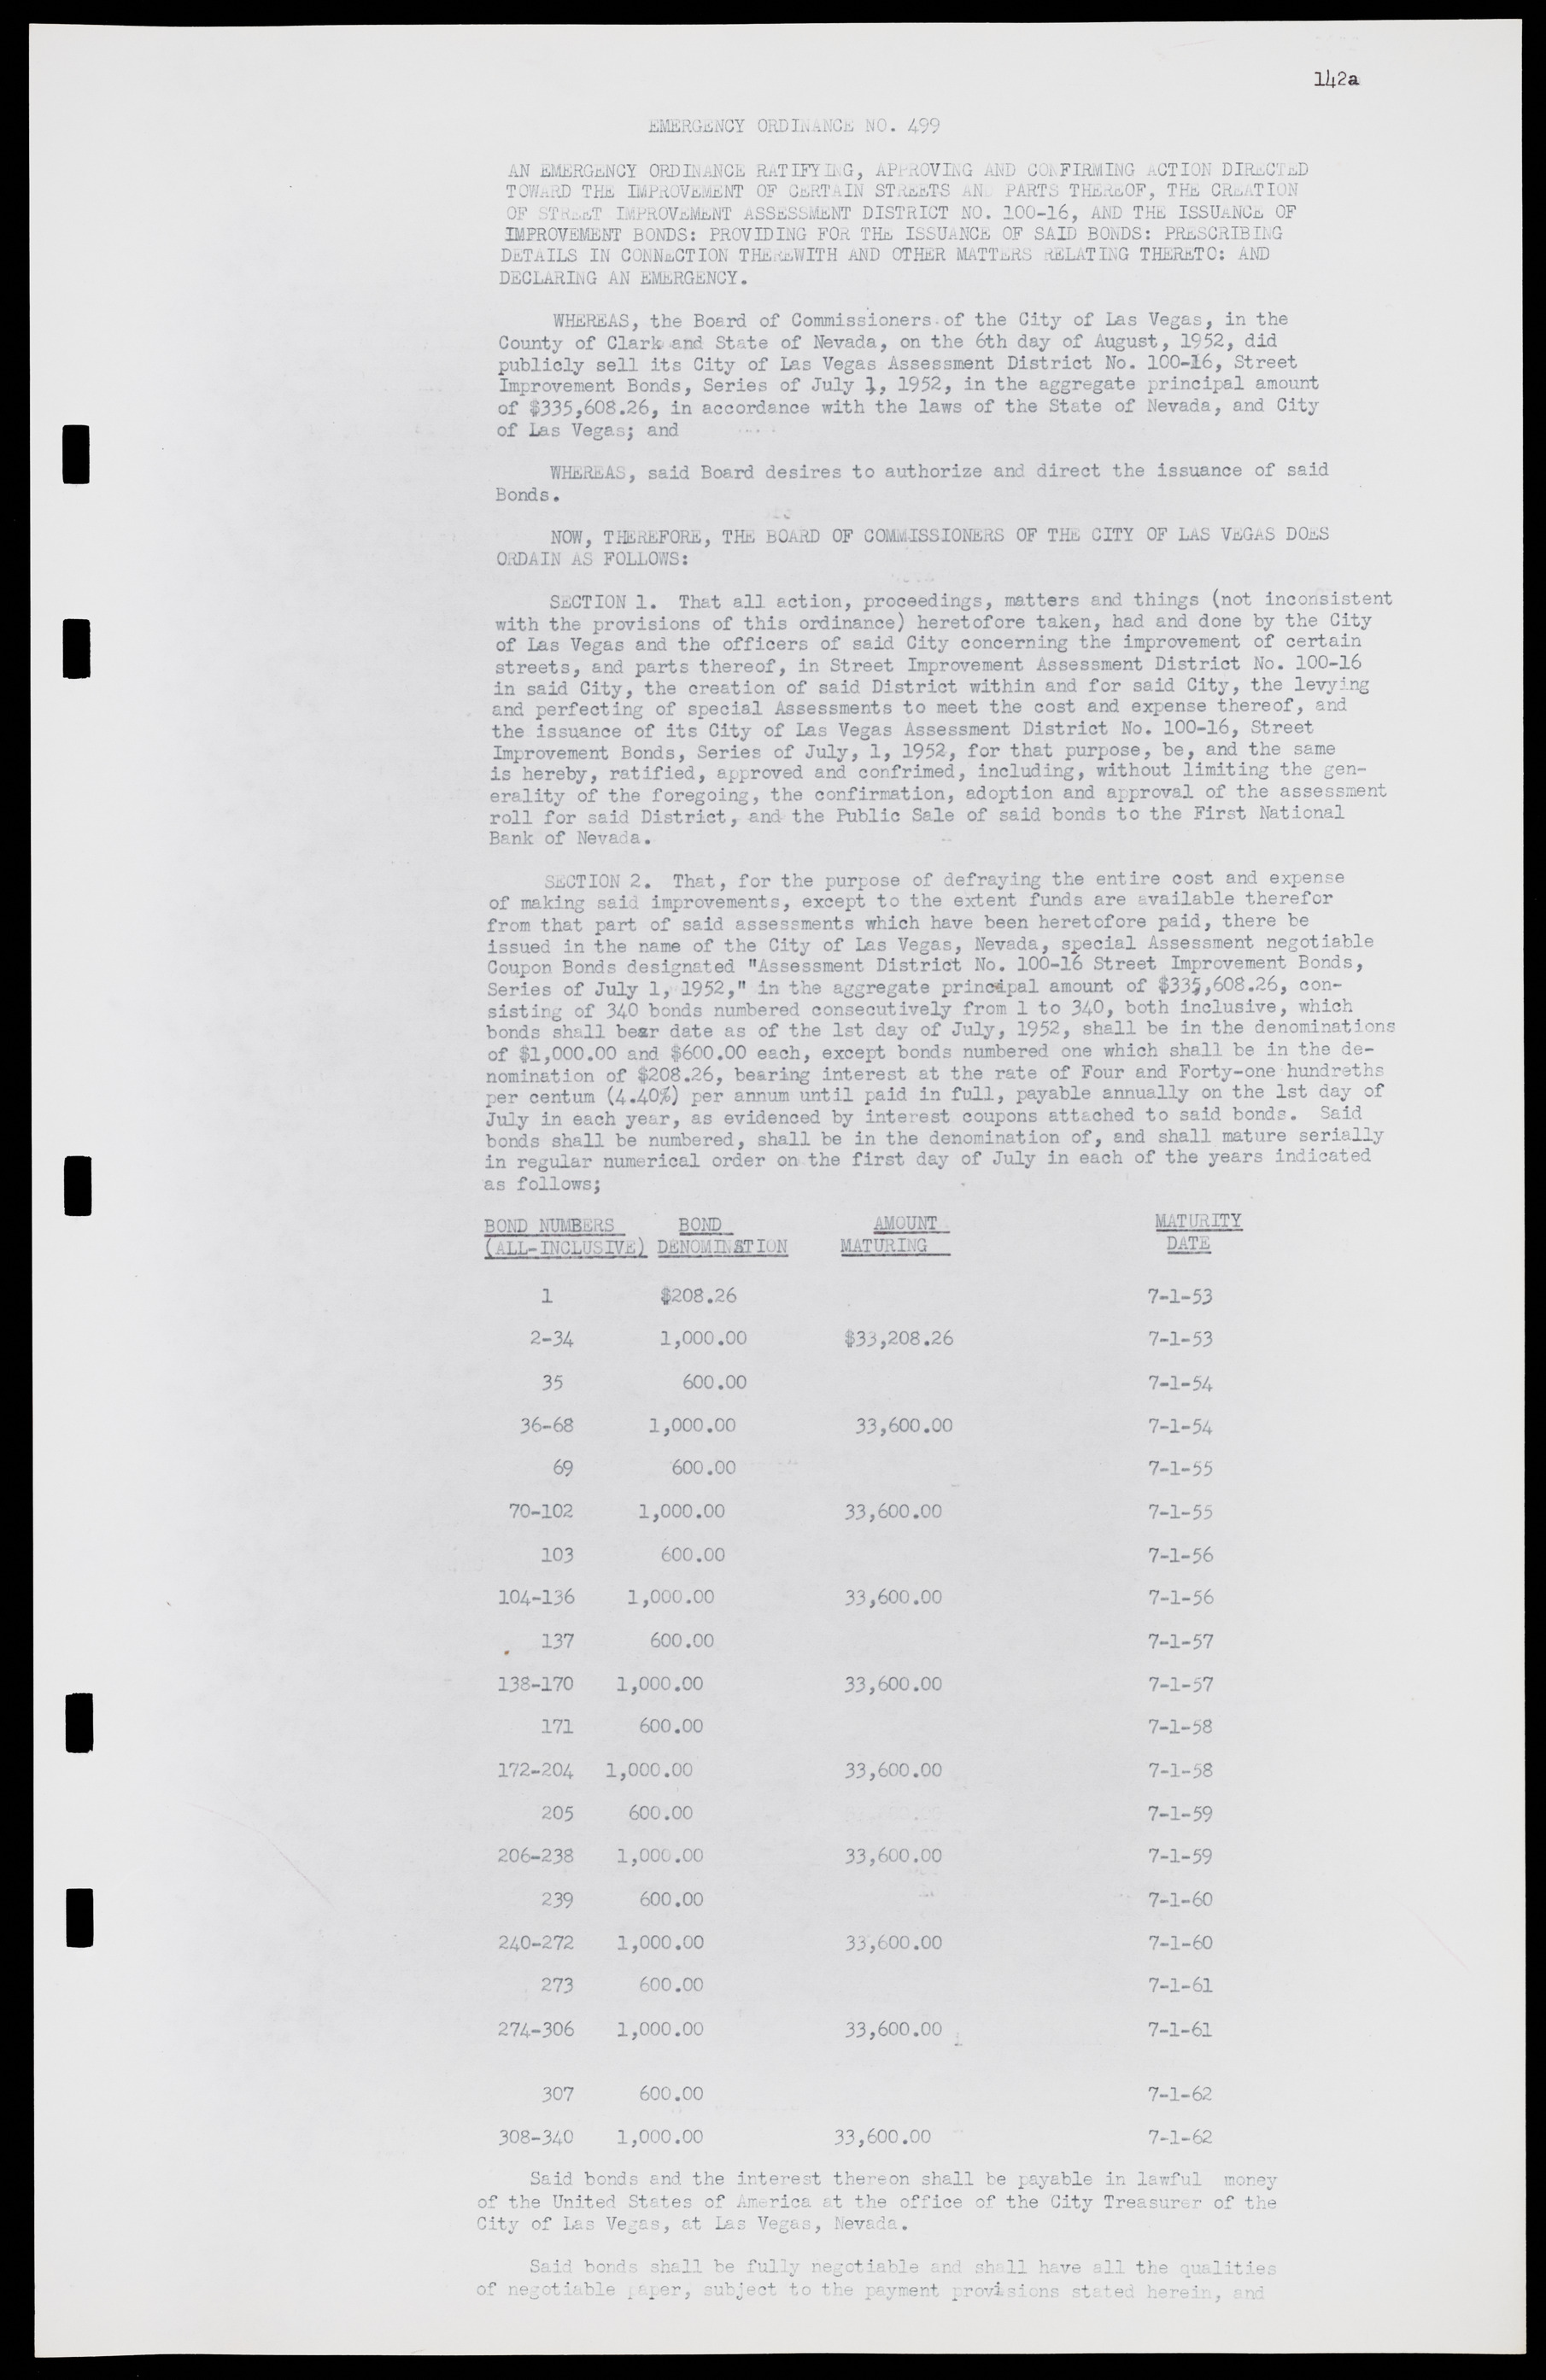 Las Vegas City Commission Minutes, May 26, 1952 to February 17, 1954, lvc000008-149